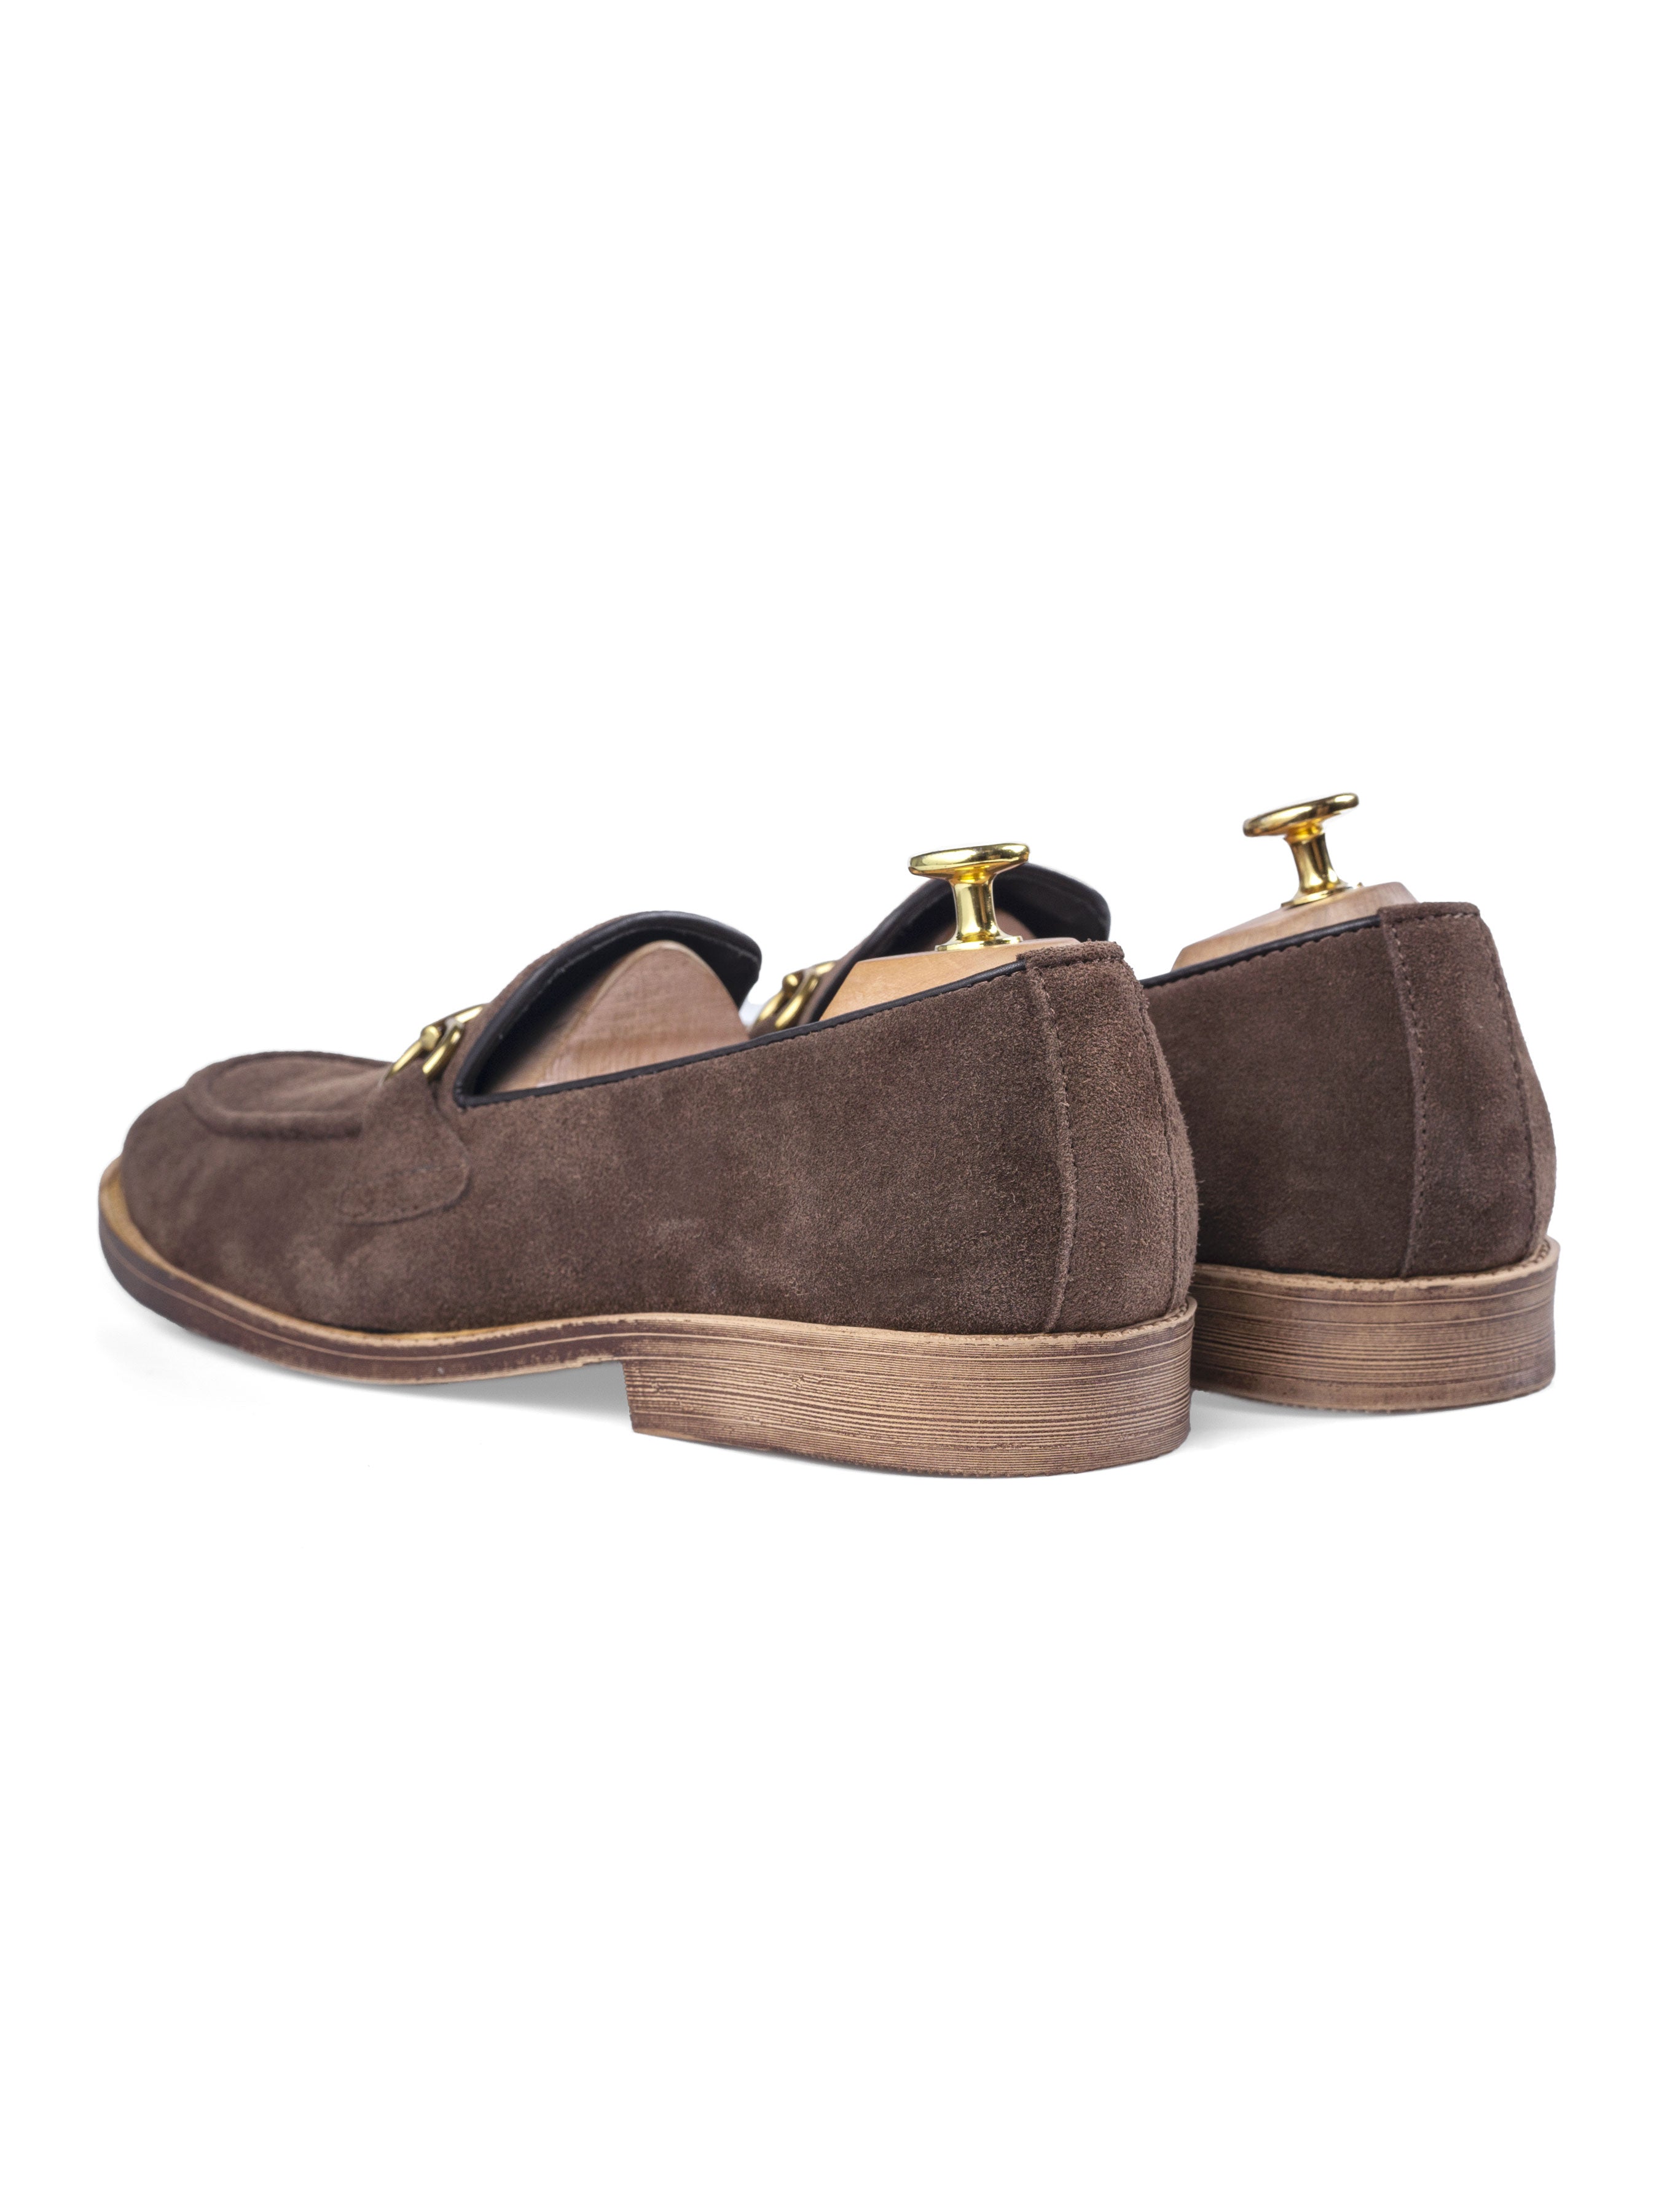 Horsebit Buckle Loafer - Coffee Suede Leather (Flexi-Sole) - Zeve Shoes